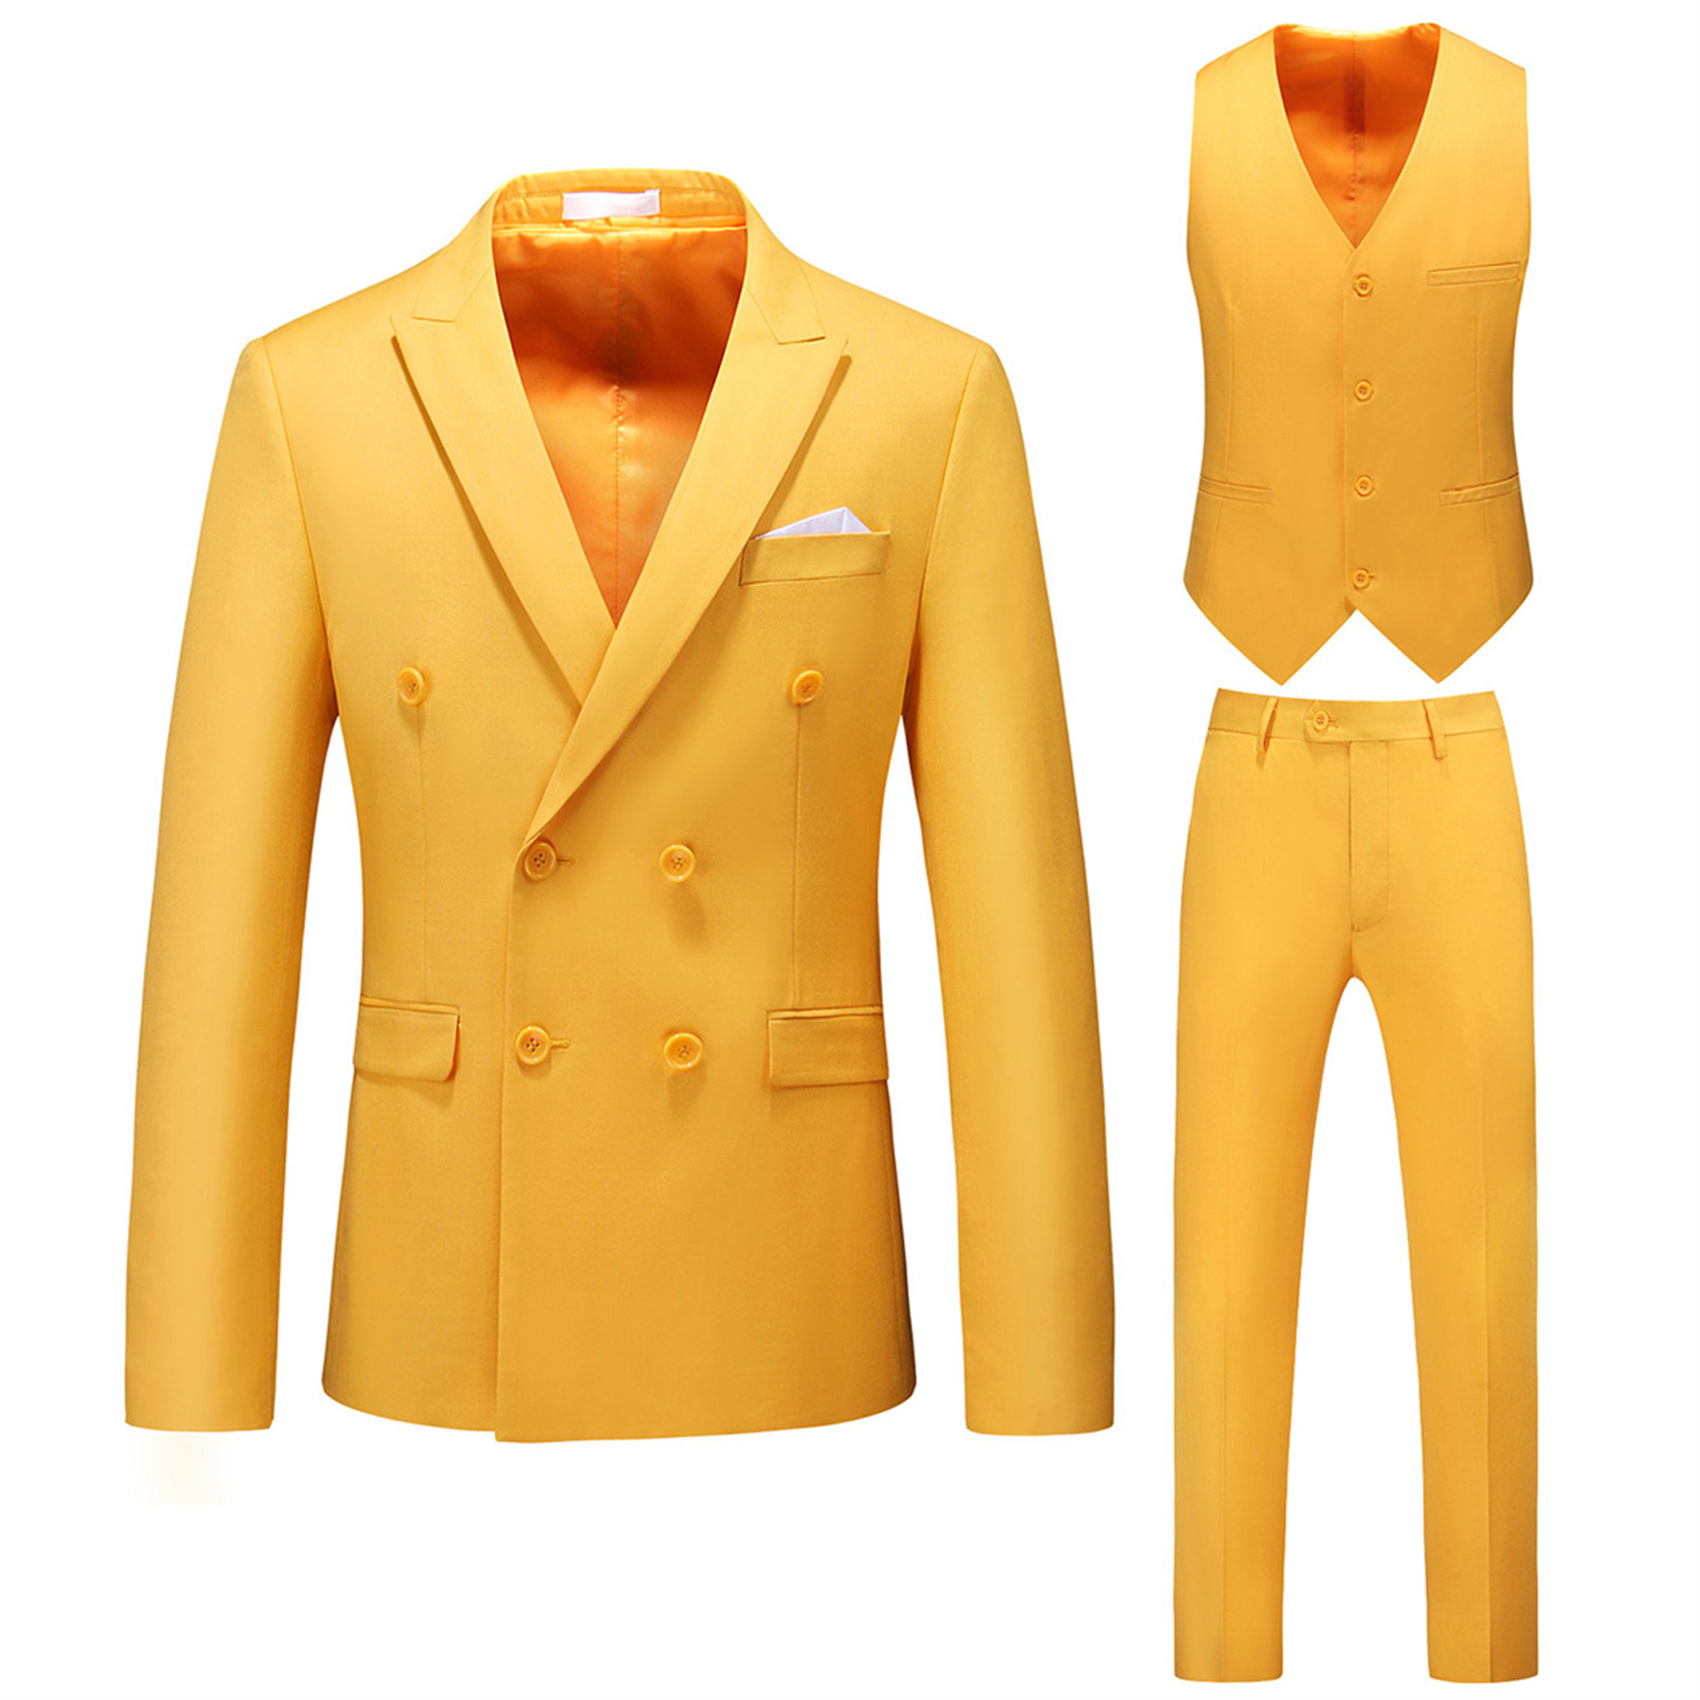 3 Piece Double Breasted Suit for Men, Slim Fit, Yellow